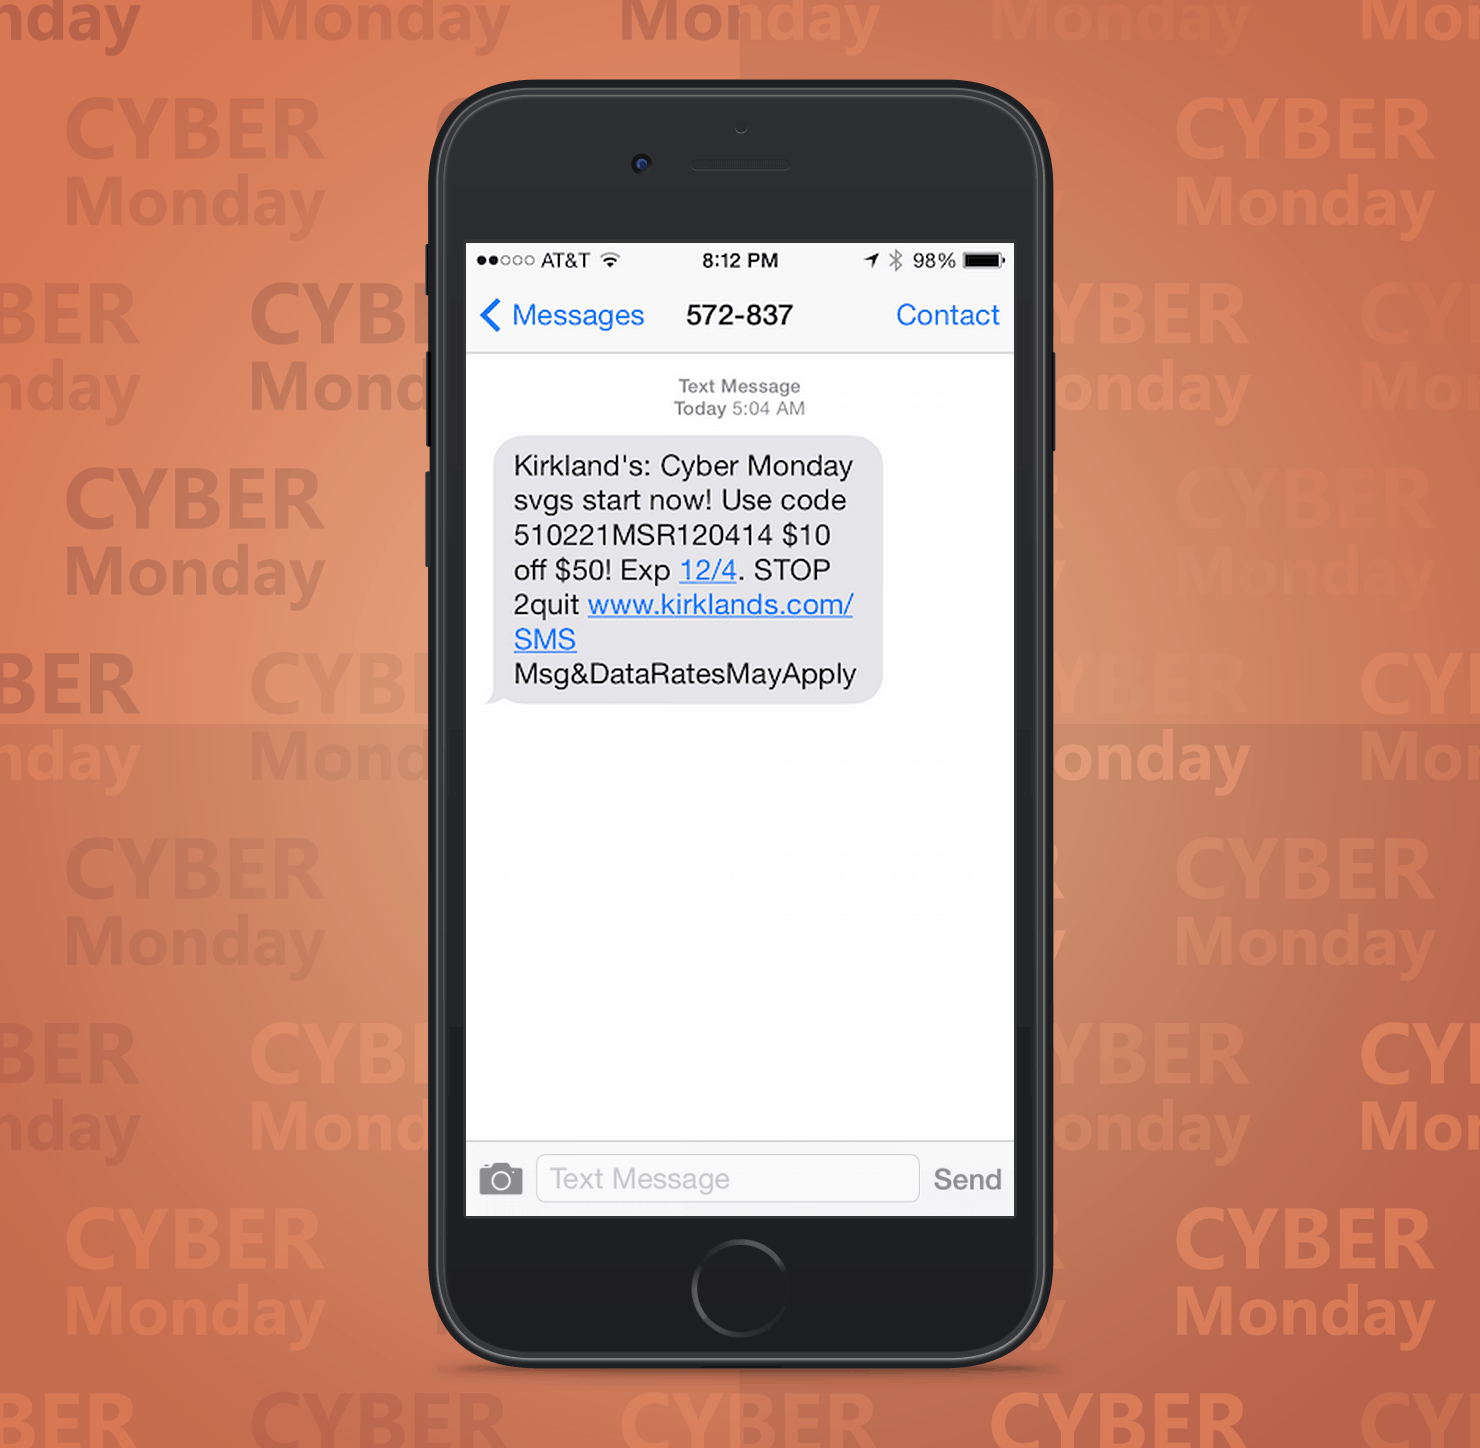 SMS Coupon Example Sent on Cyber Monday From Kirklands Retail Stores to Customers